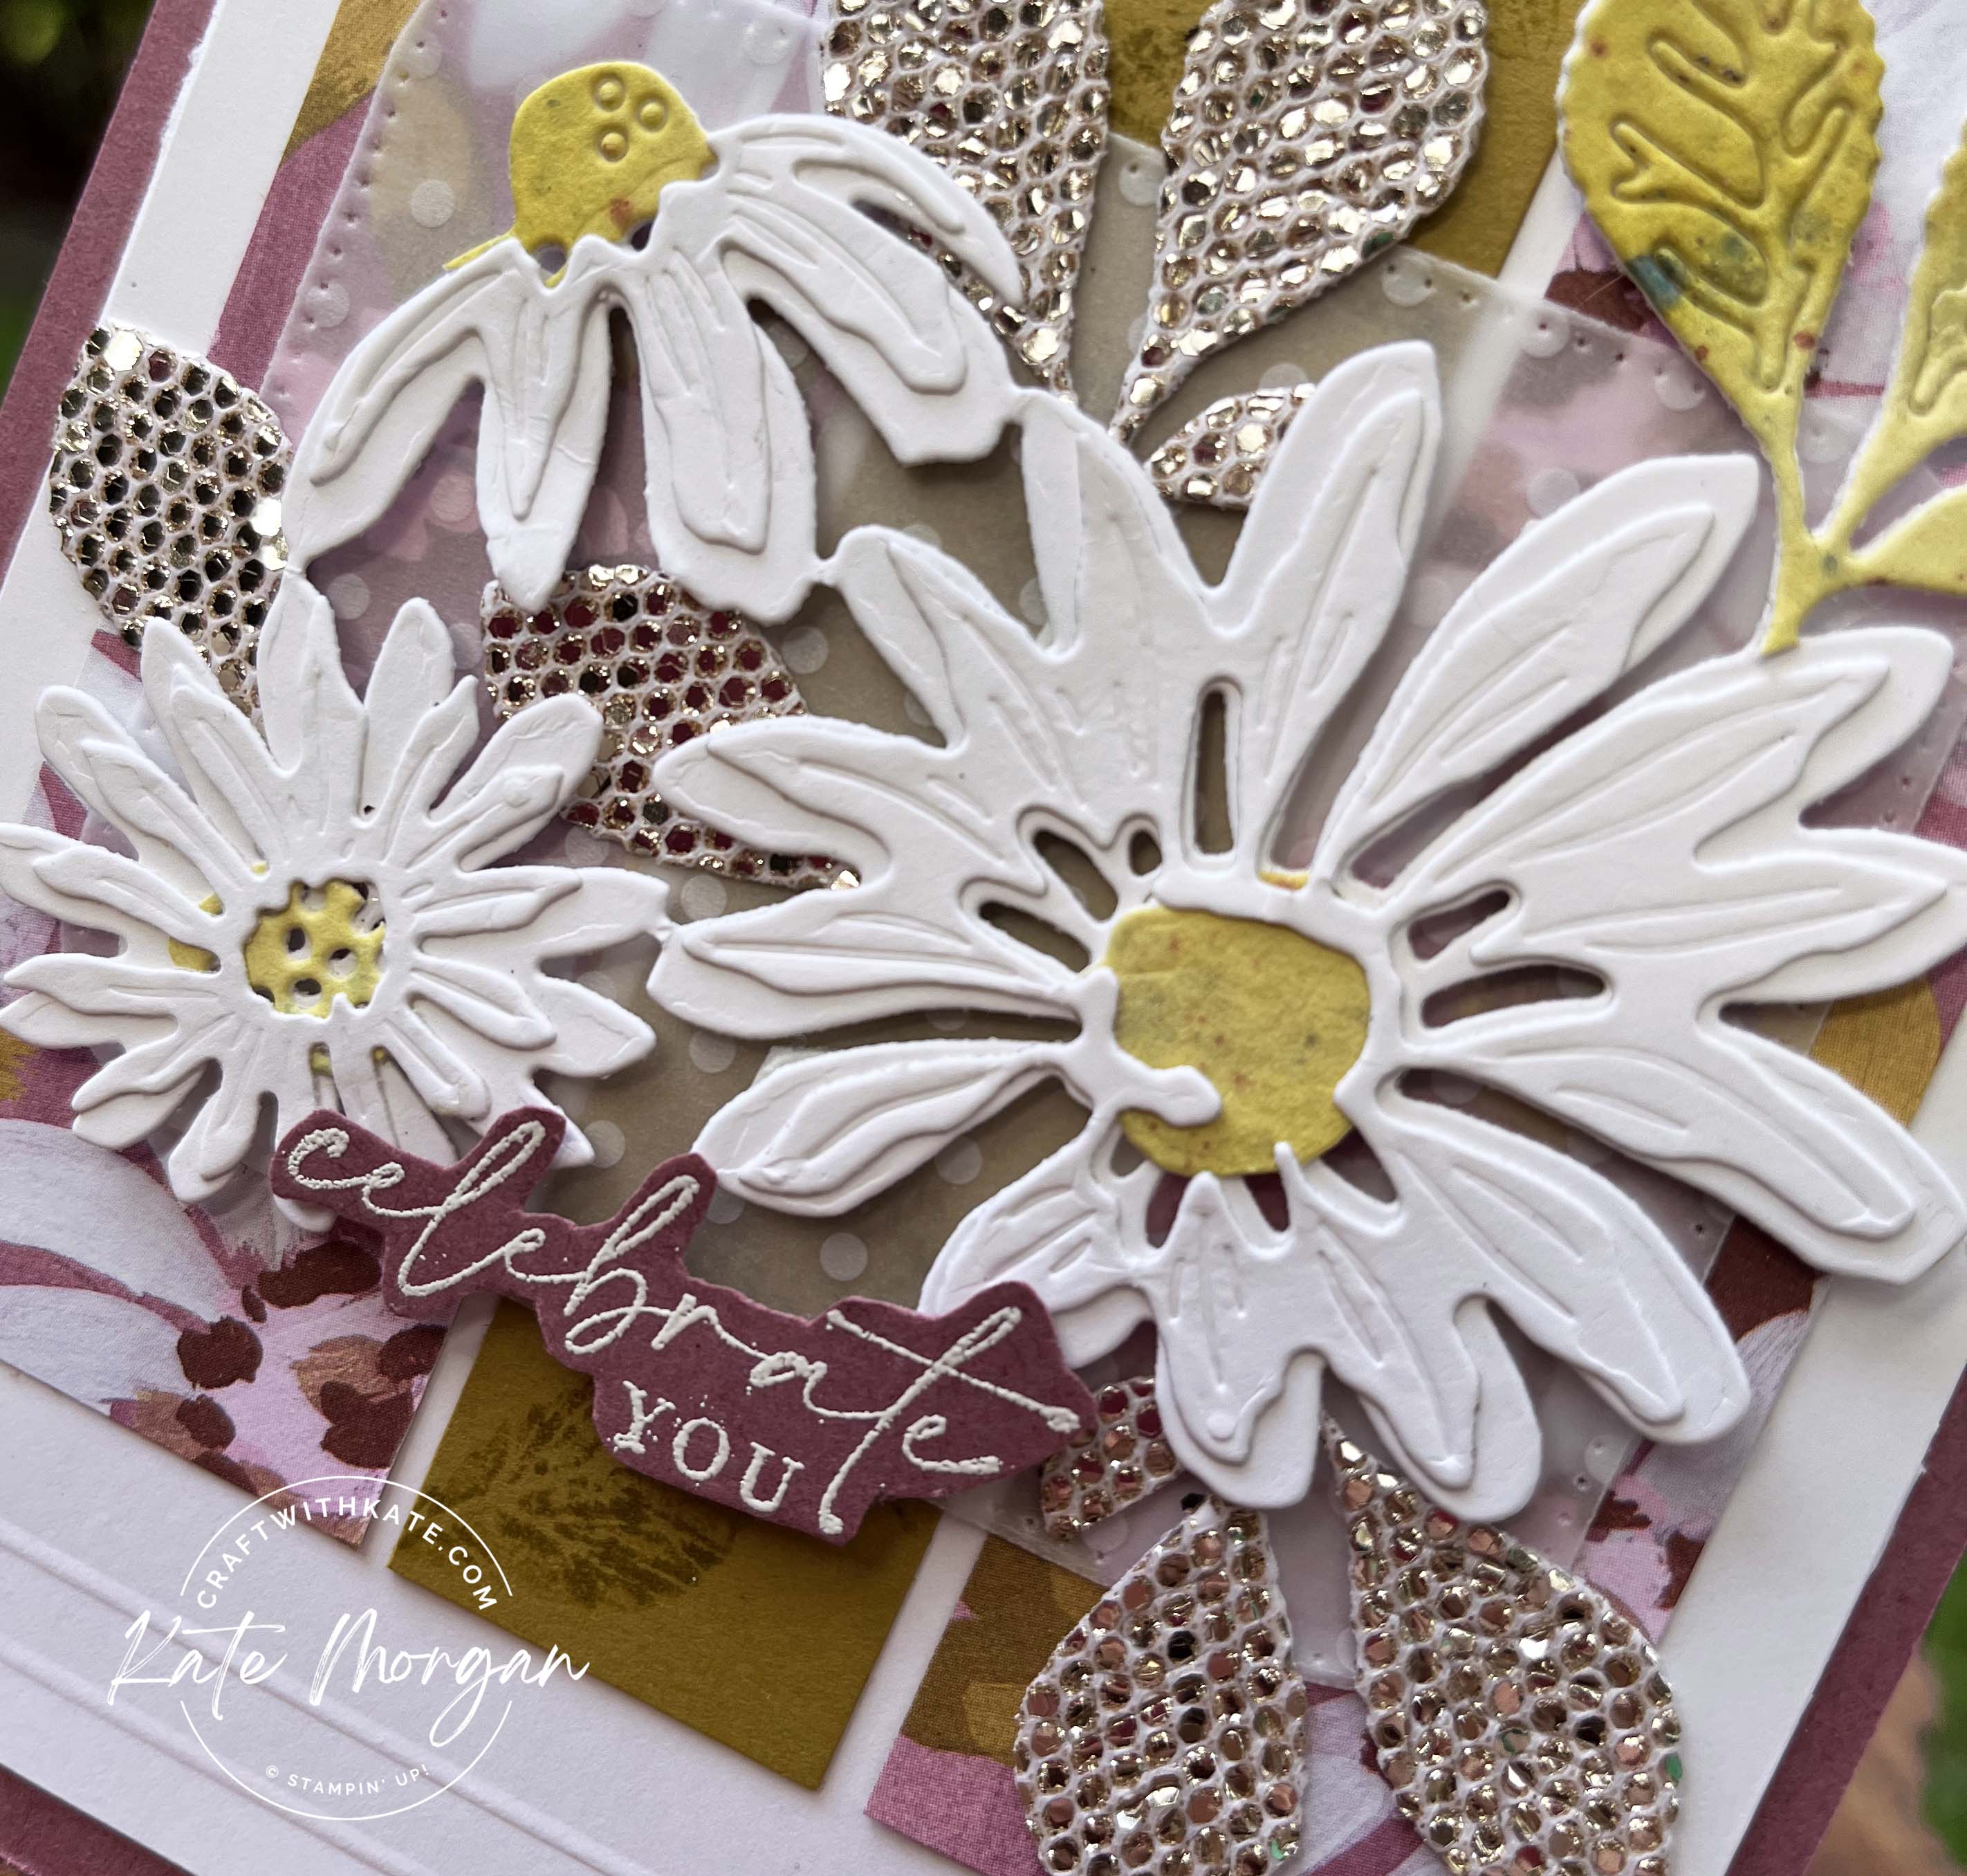 Cheerful Daisies Card for Wild Wheat colour creations blog hop 2023 by Kate Morgan, Stampin Up Australia.